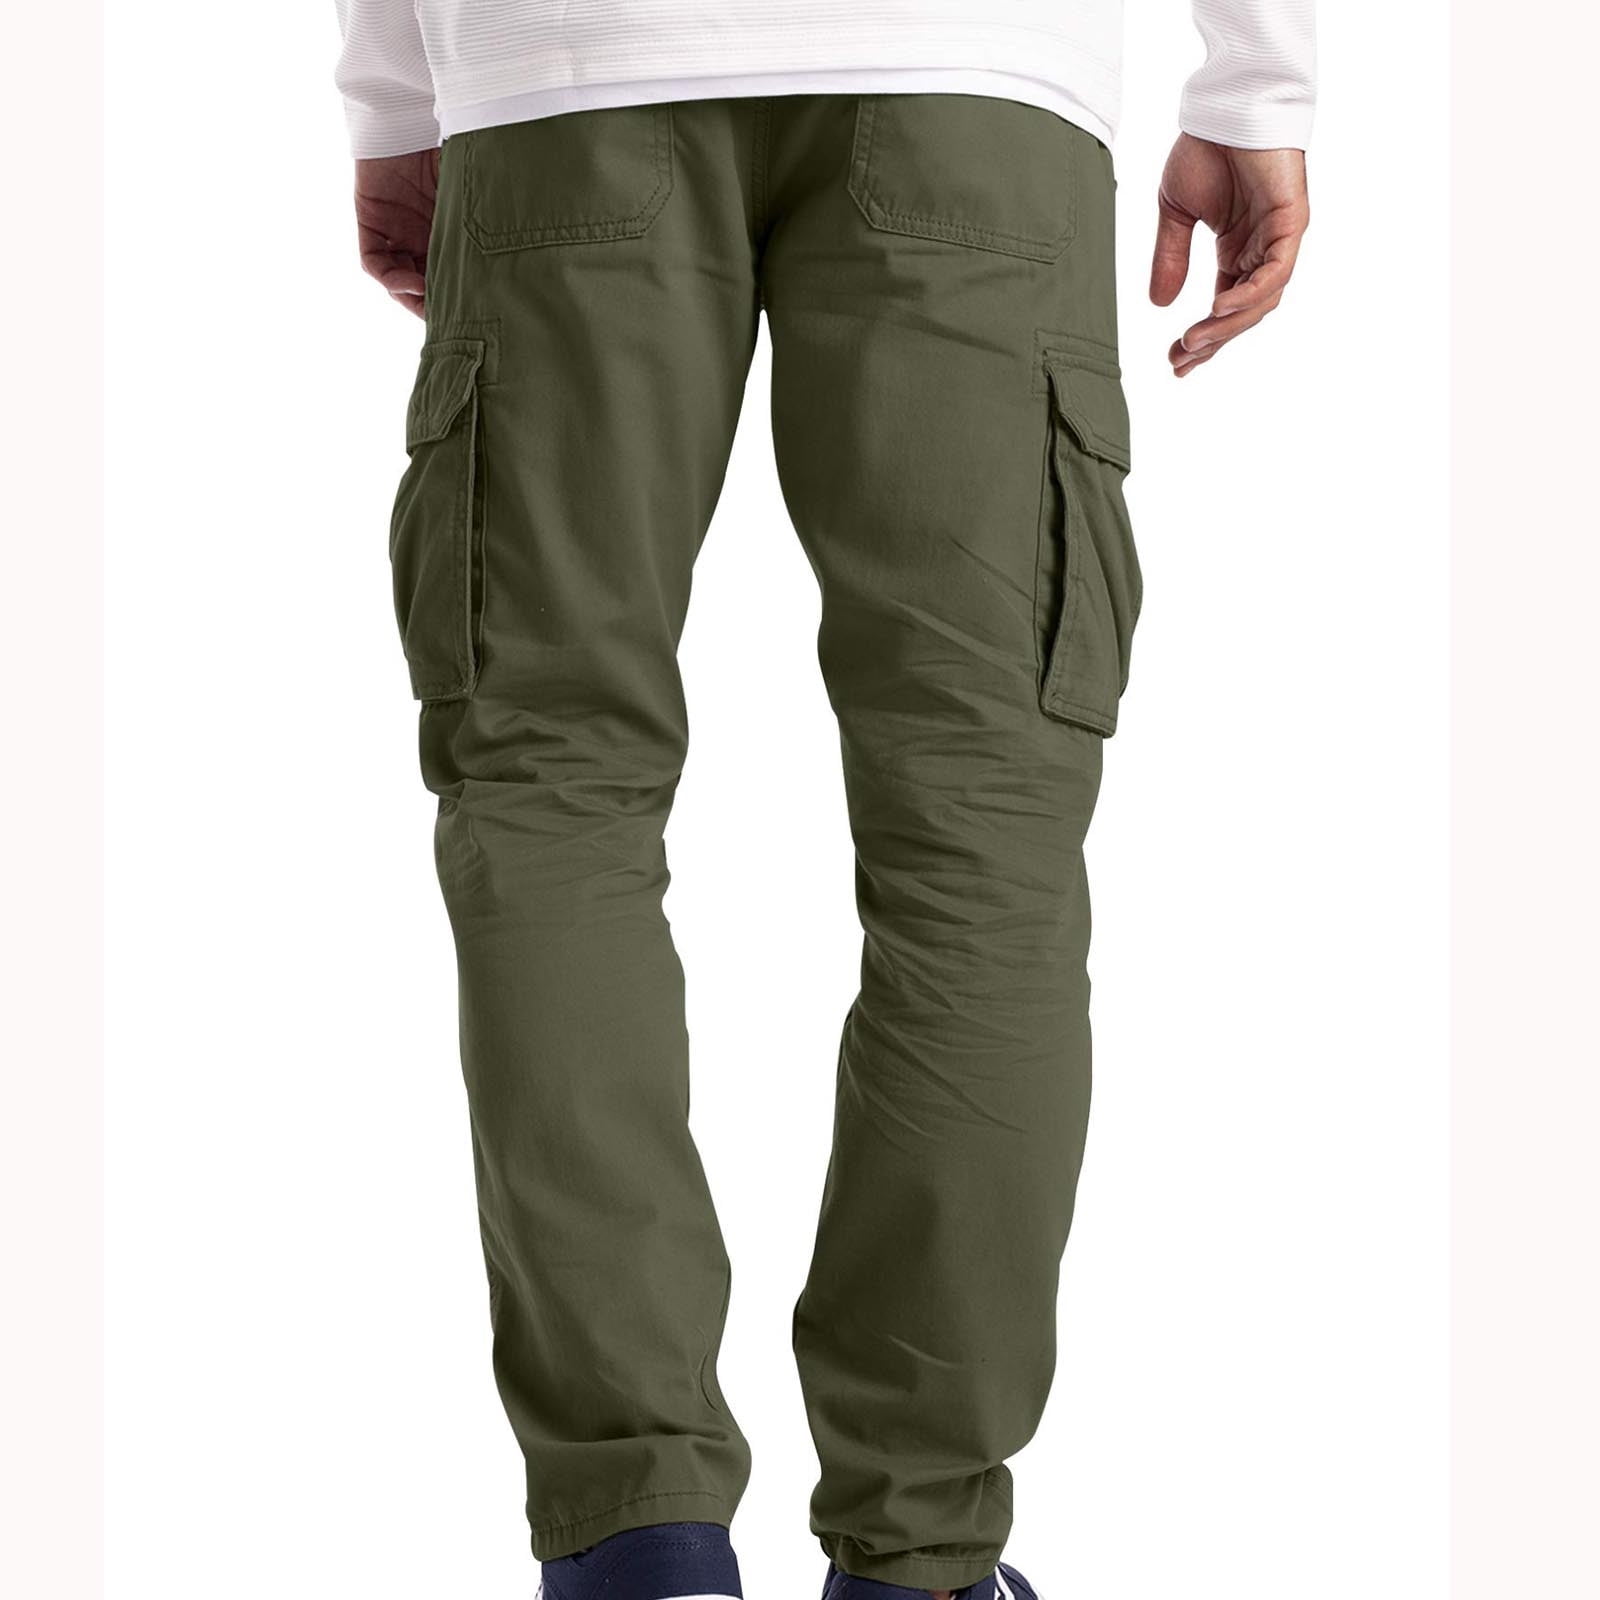 High Quality Wholesale Sixth June Cargo Pants With Multiple Pockets,  Drawstring, Zipper, Embroidery, And Sweatpants For Men And Women From  Minoredress, $19.29 | DHgate.Com